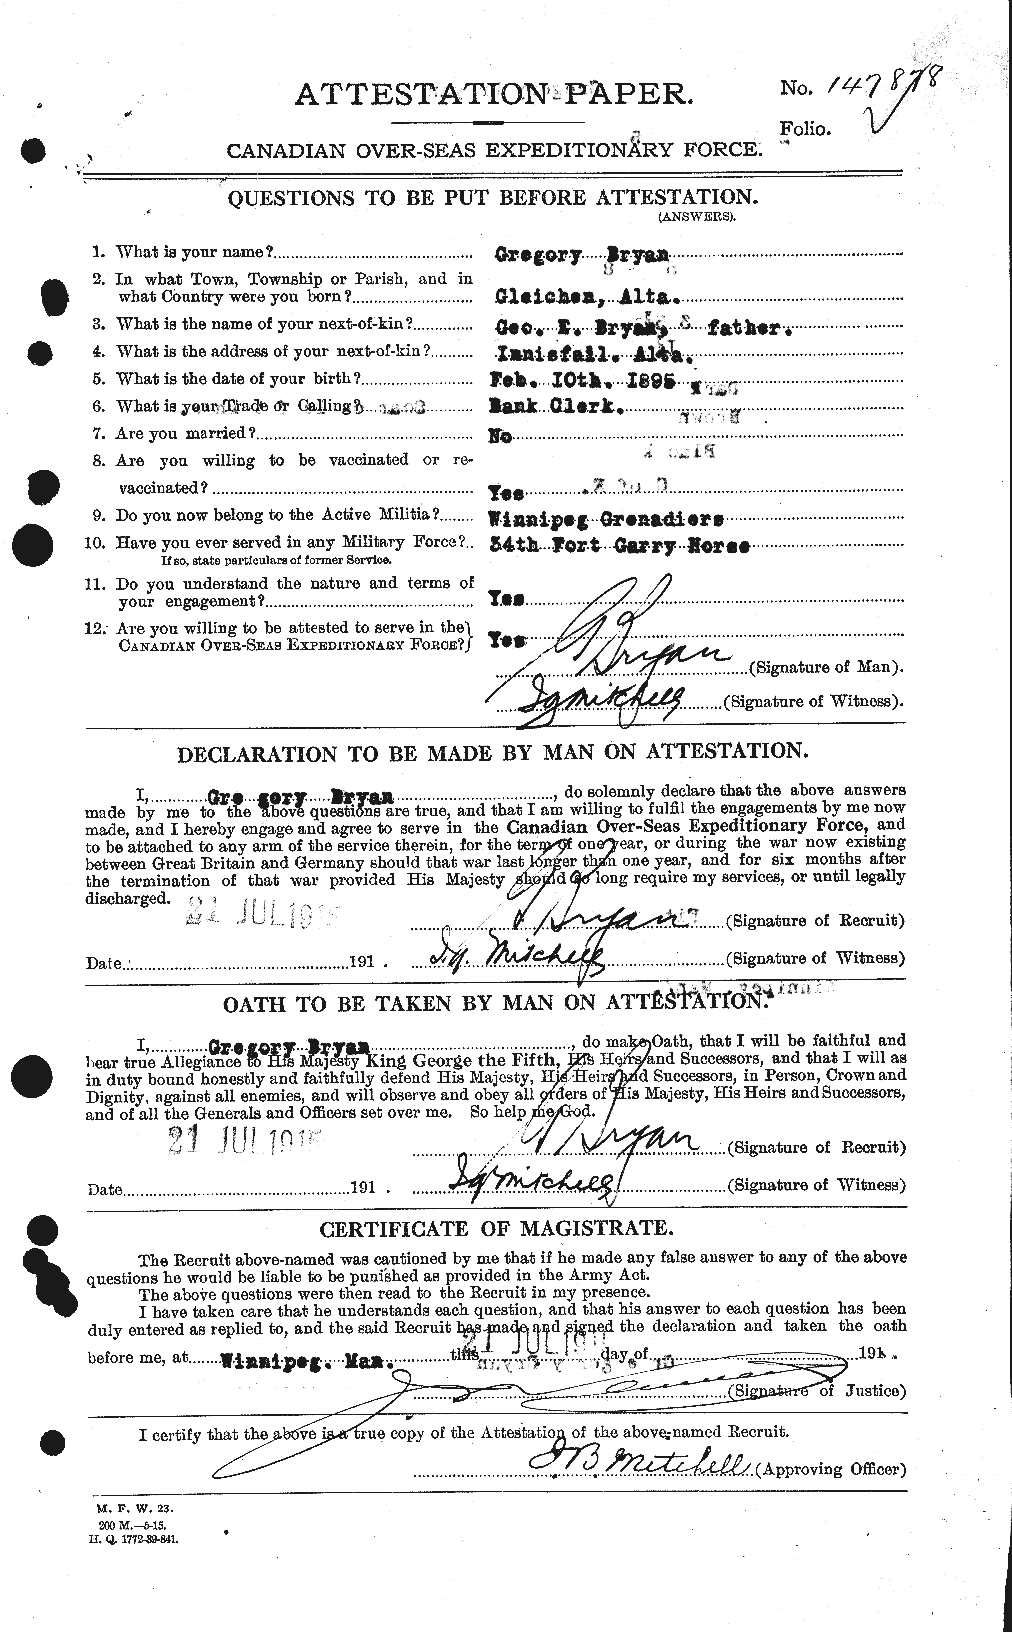 Personnel Records of the First World War - CEF 270176a